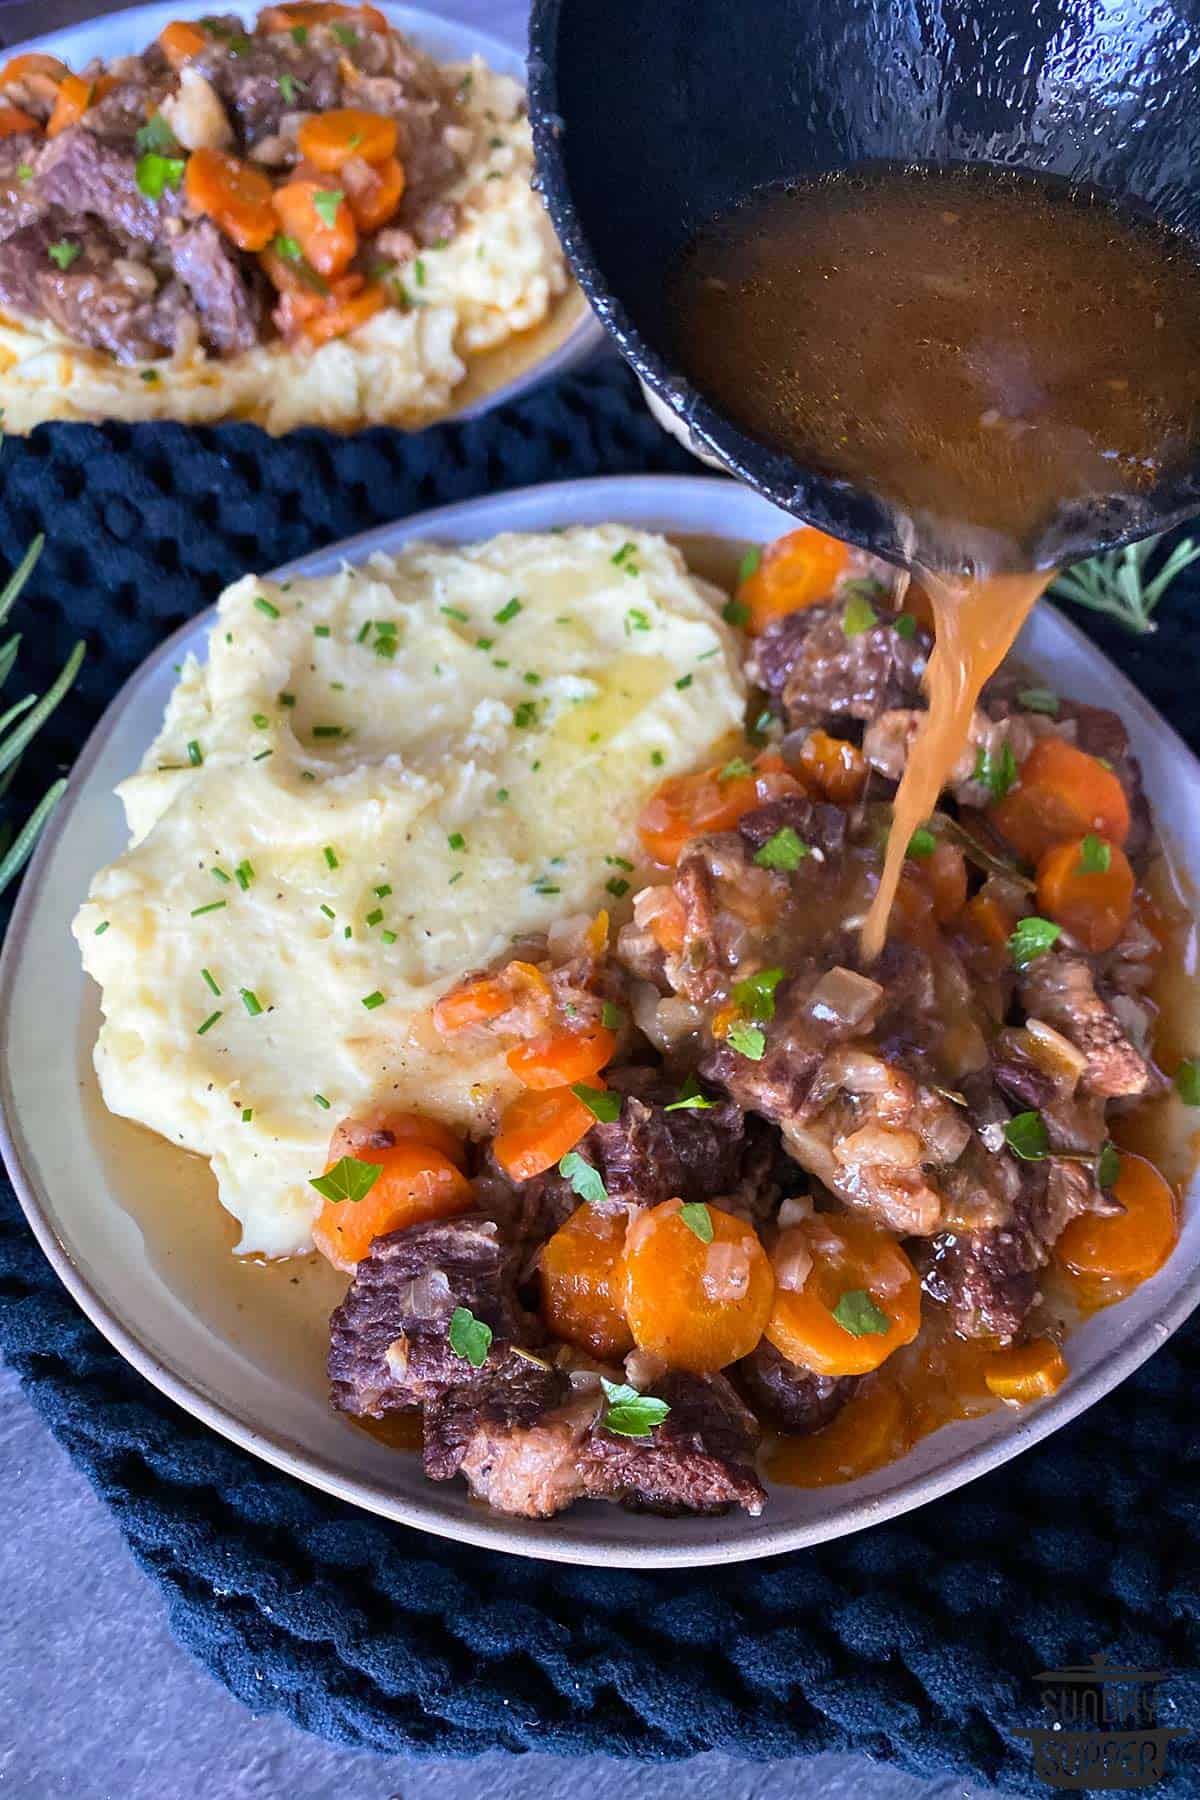 gravy being poured on a plate of short ribs and mashed potatoes